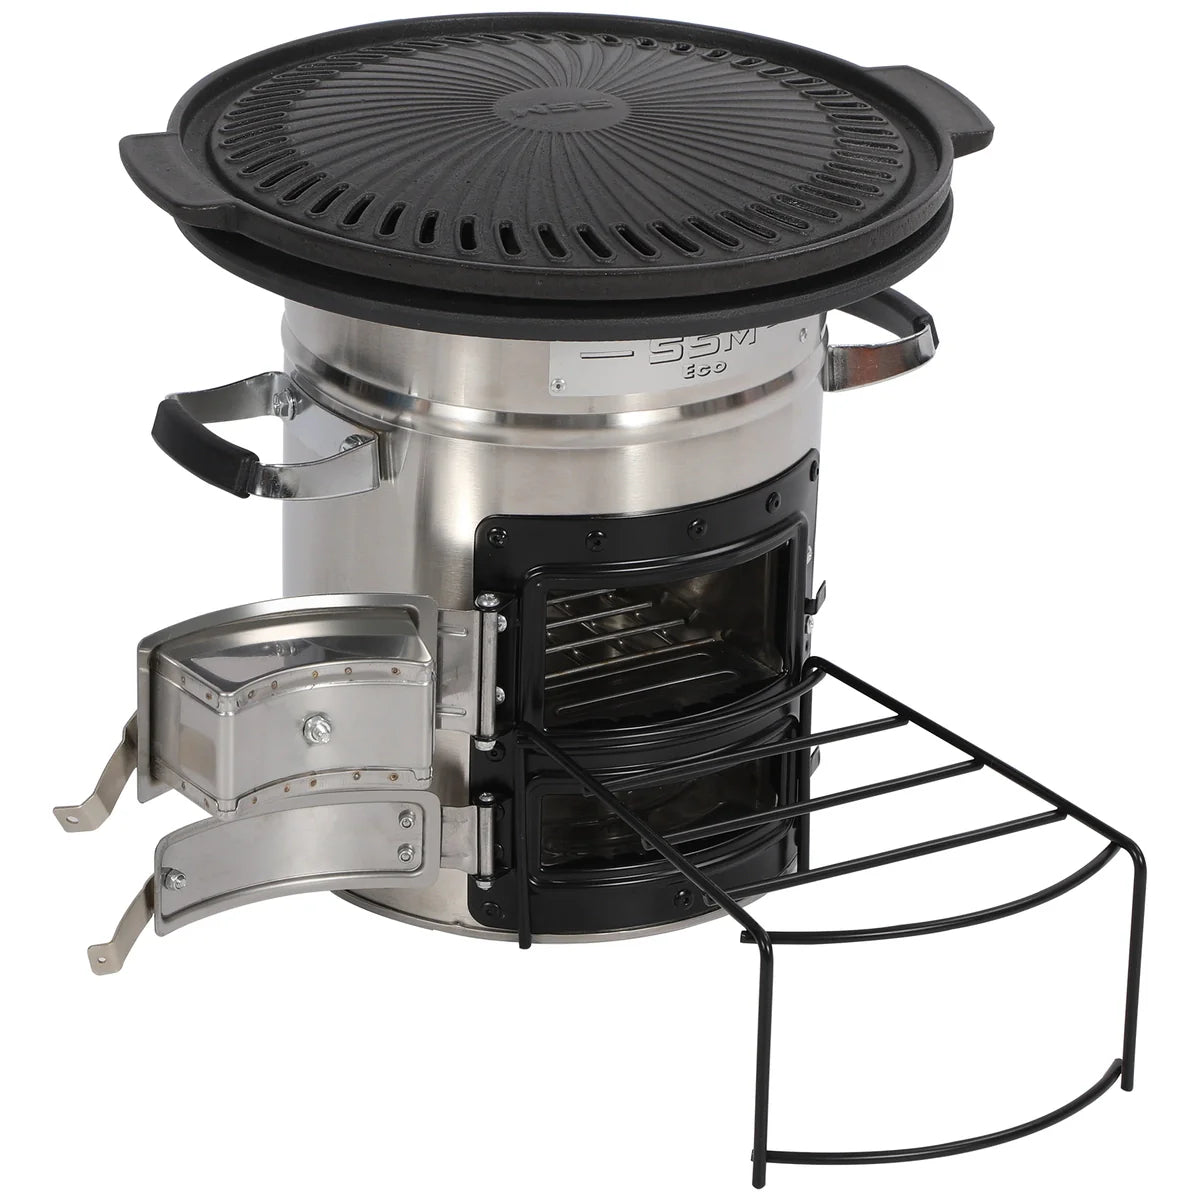 Redcamp Portable Rocket Stove for Camping